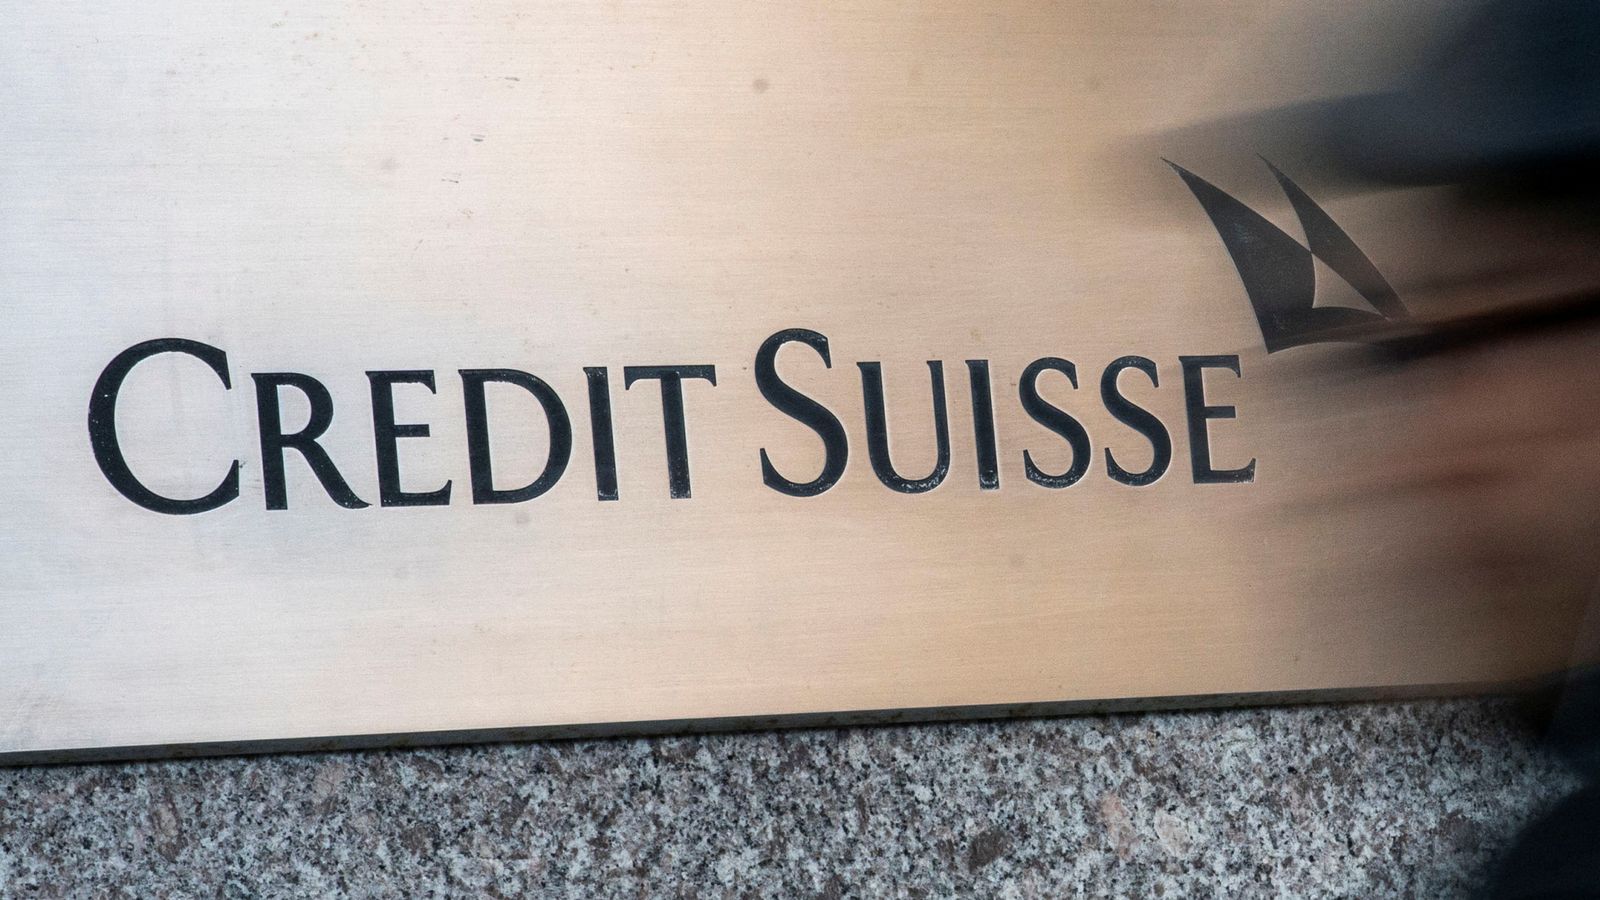 Credit Suisse secures £44.5bn lifeline amid fears of global financial crisis